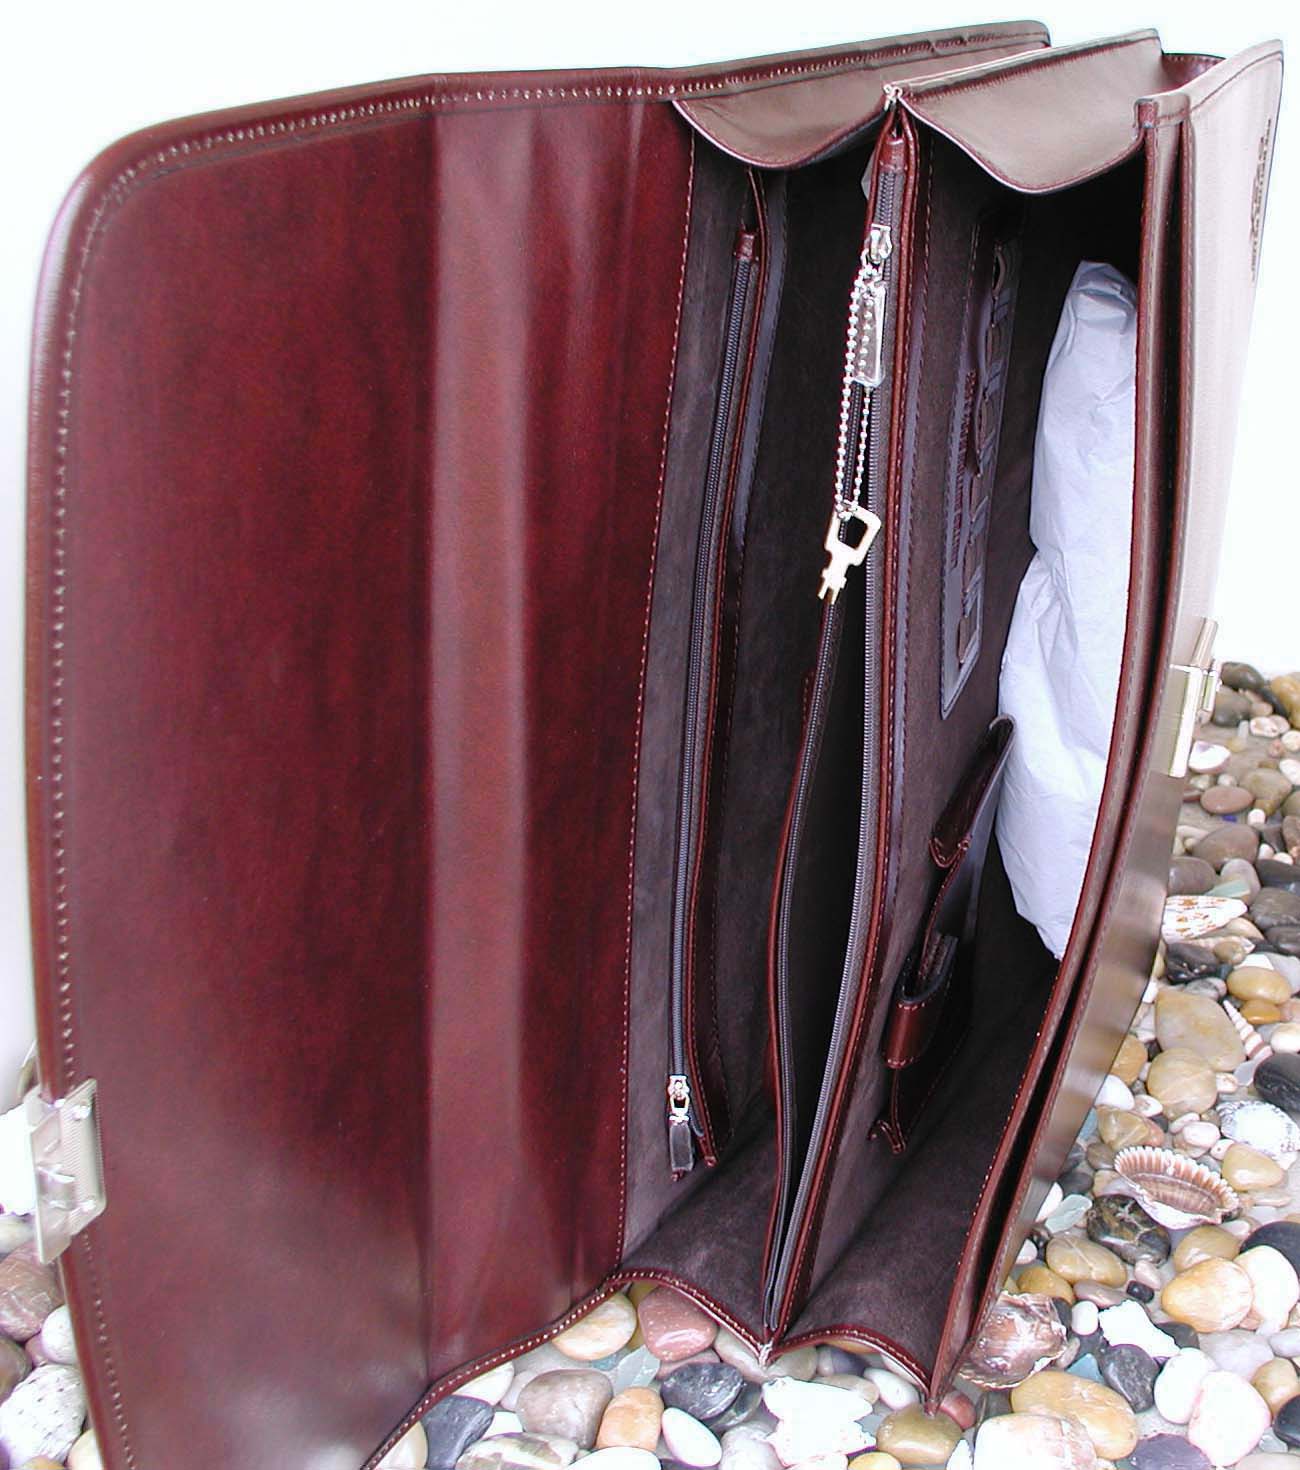 Xezo - Overview of the inside compartments of the Maroon Leather Briefcase